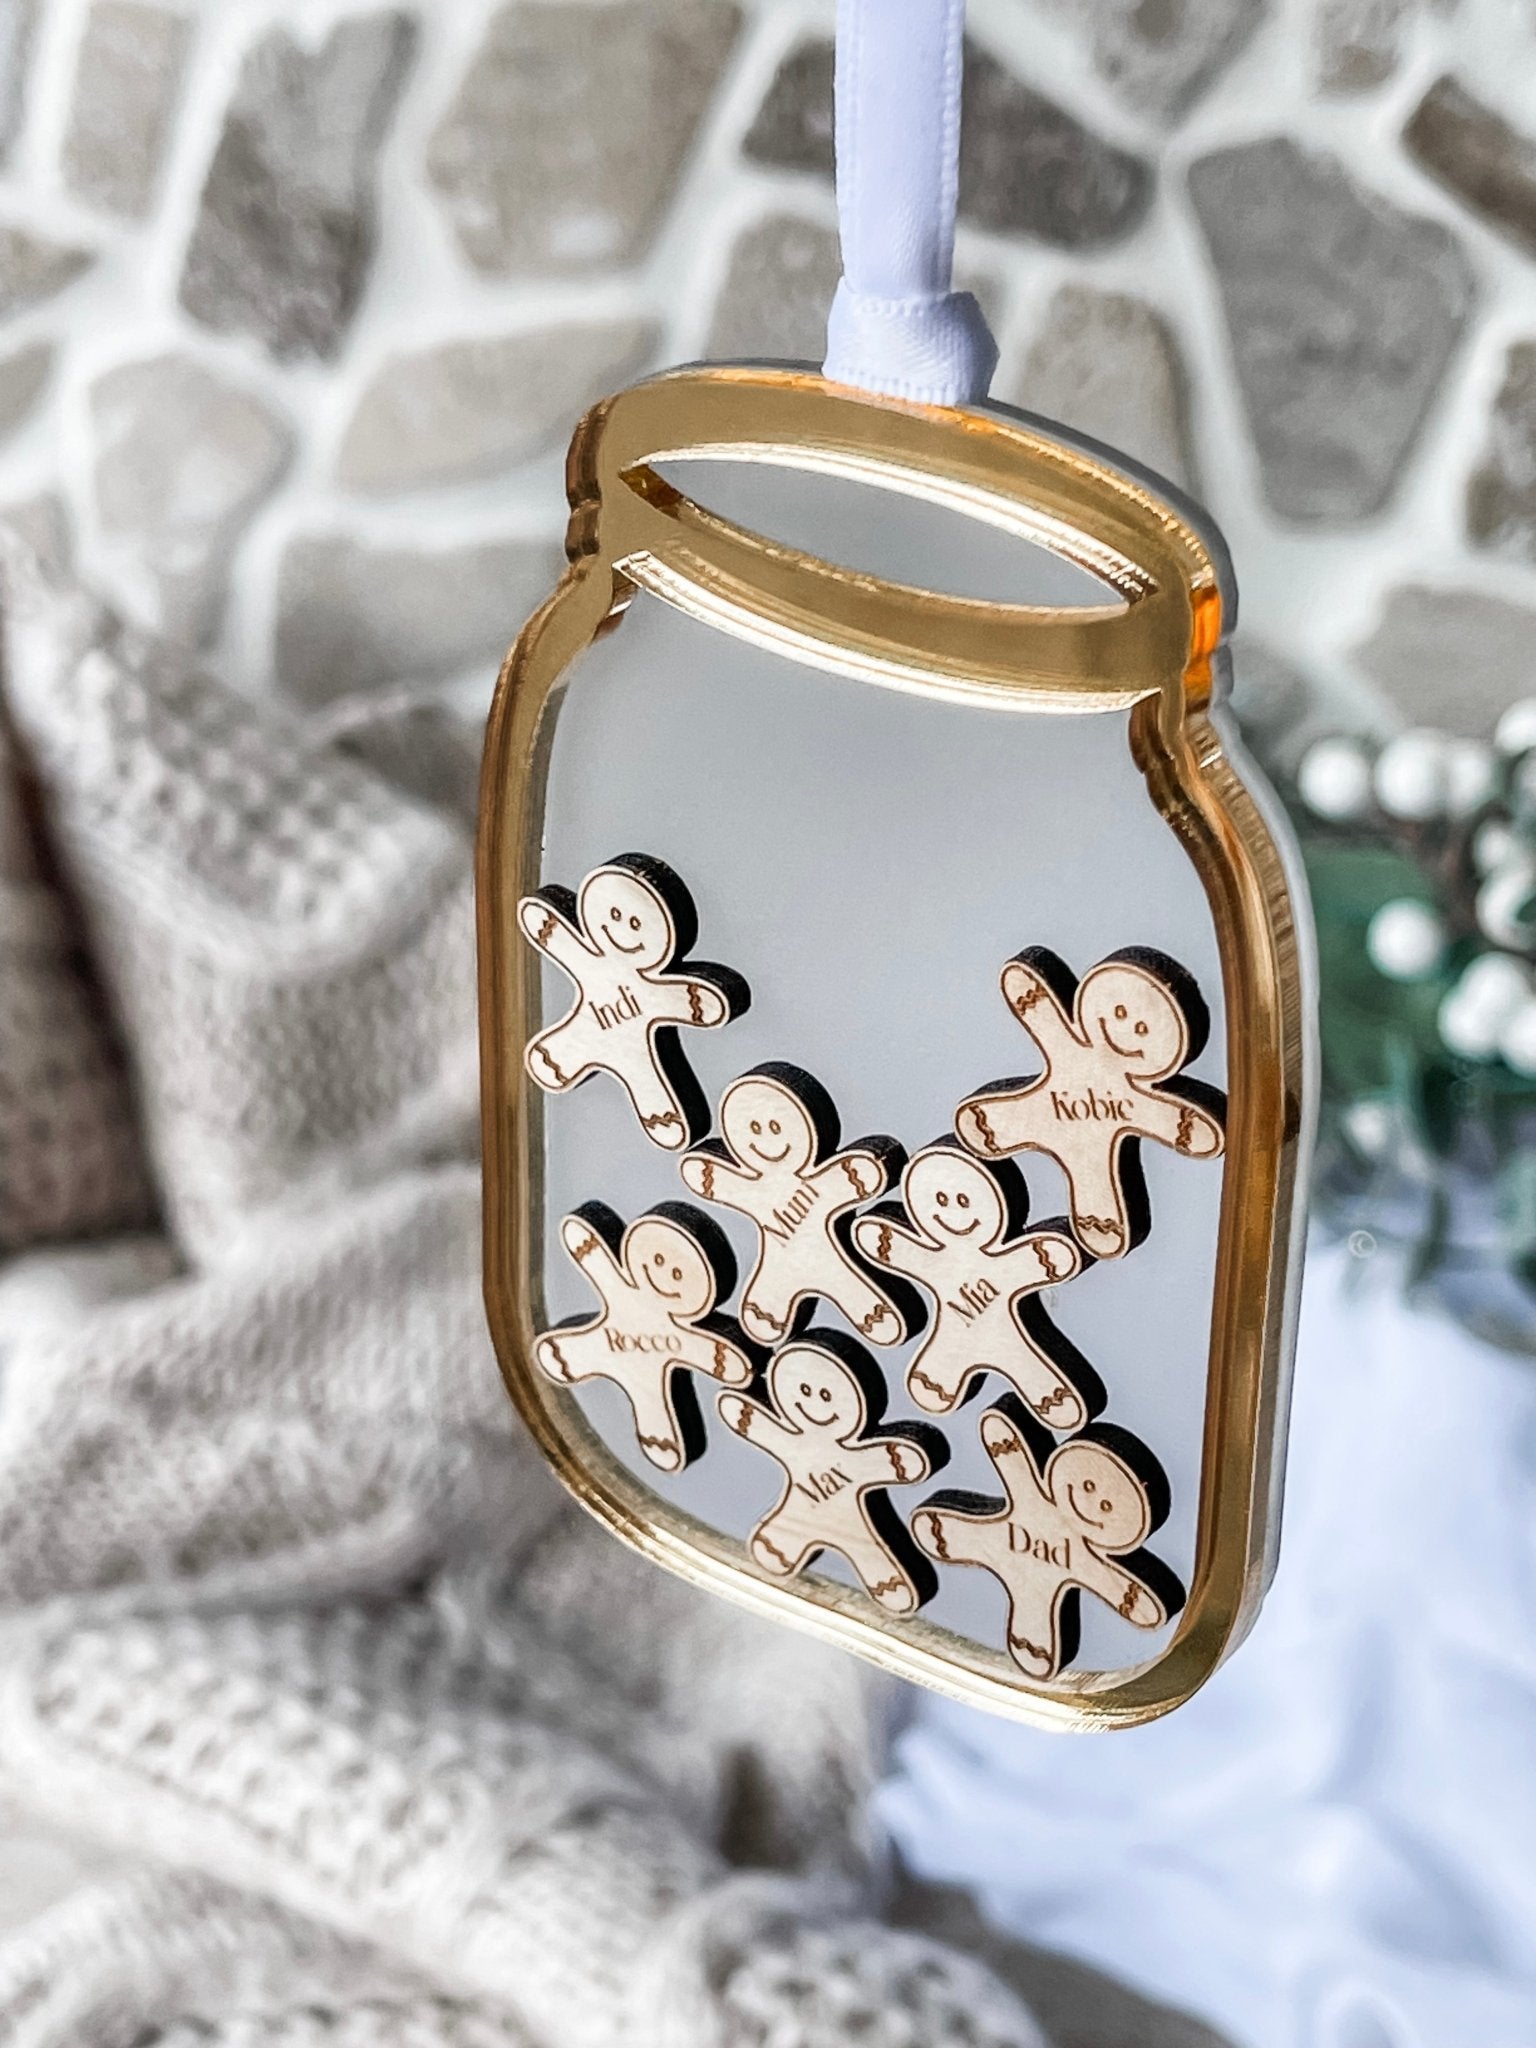 Gingerbread in Jar Christmas Ornament - The Humble Gift Co.